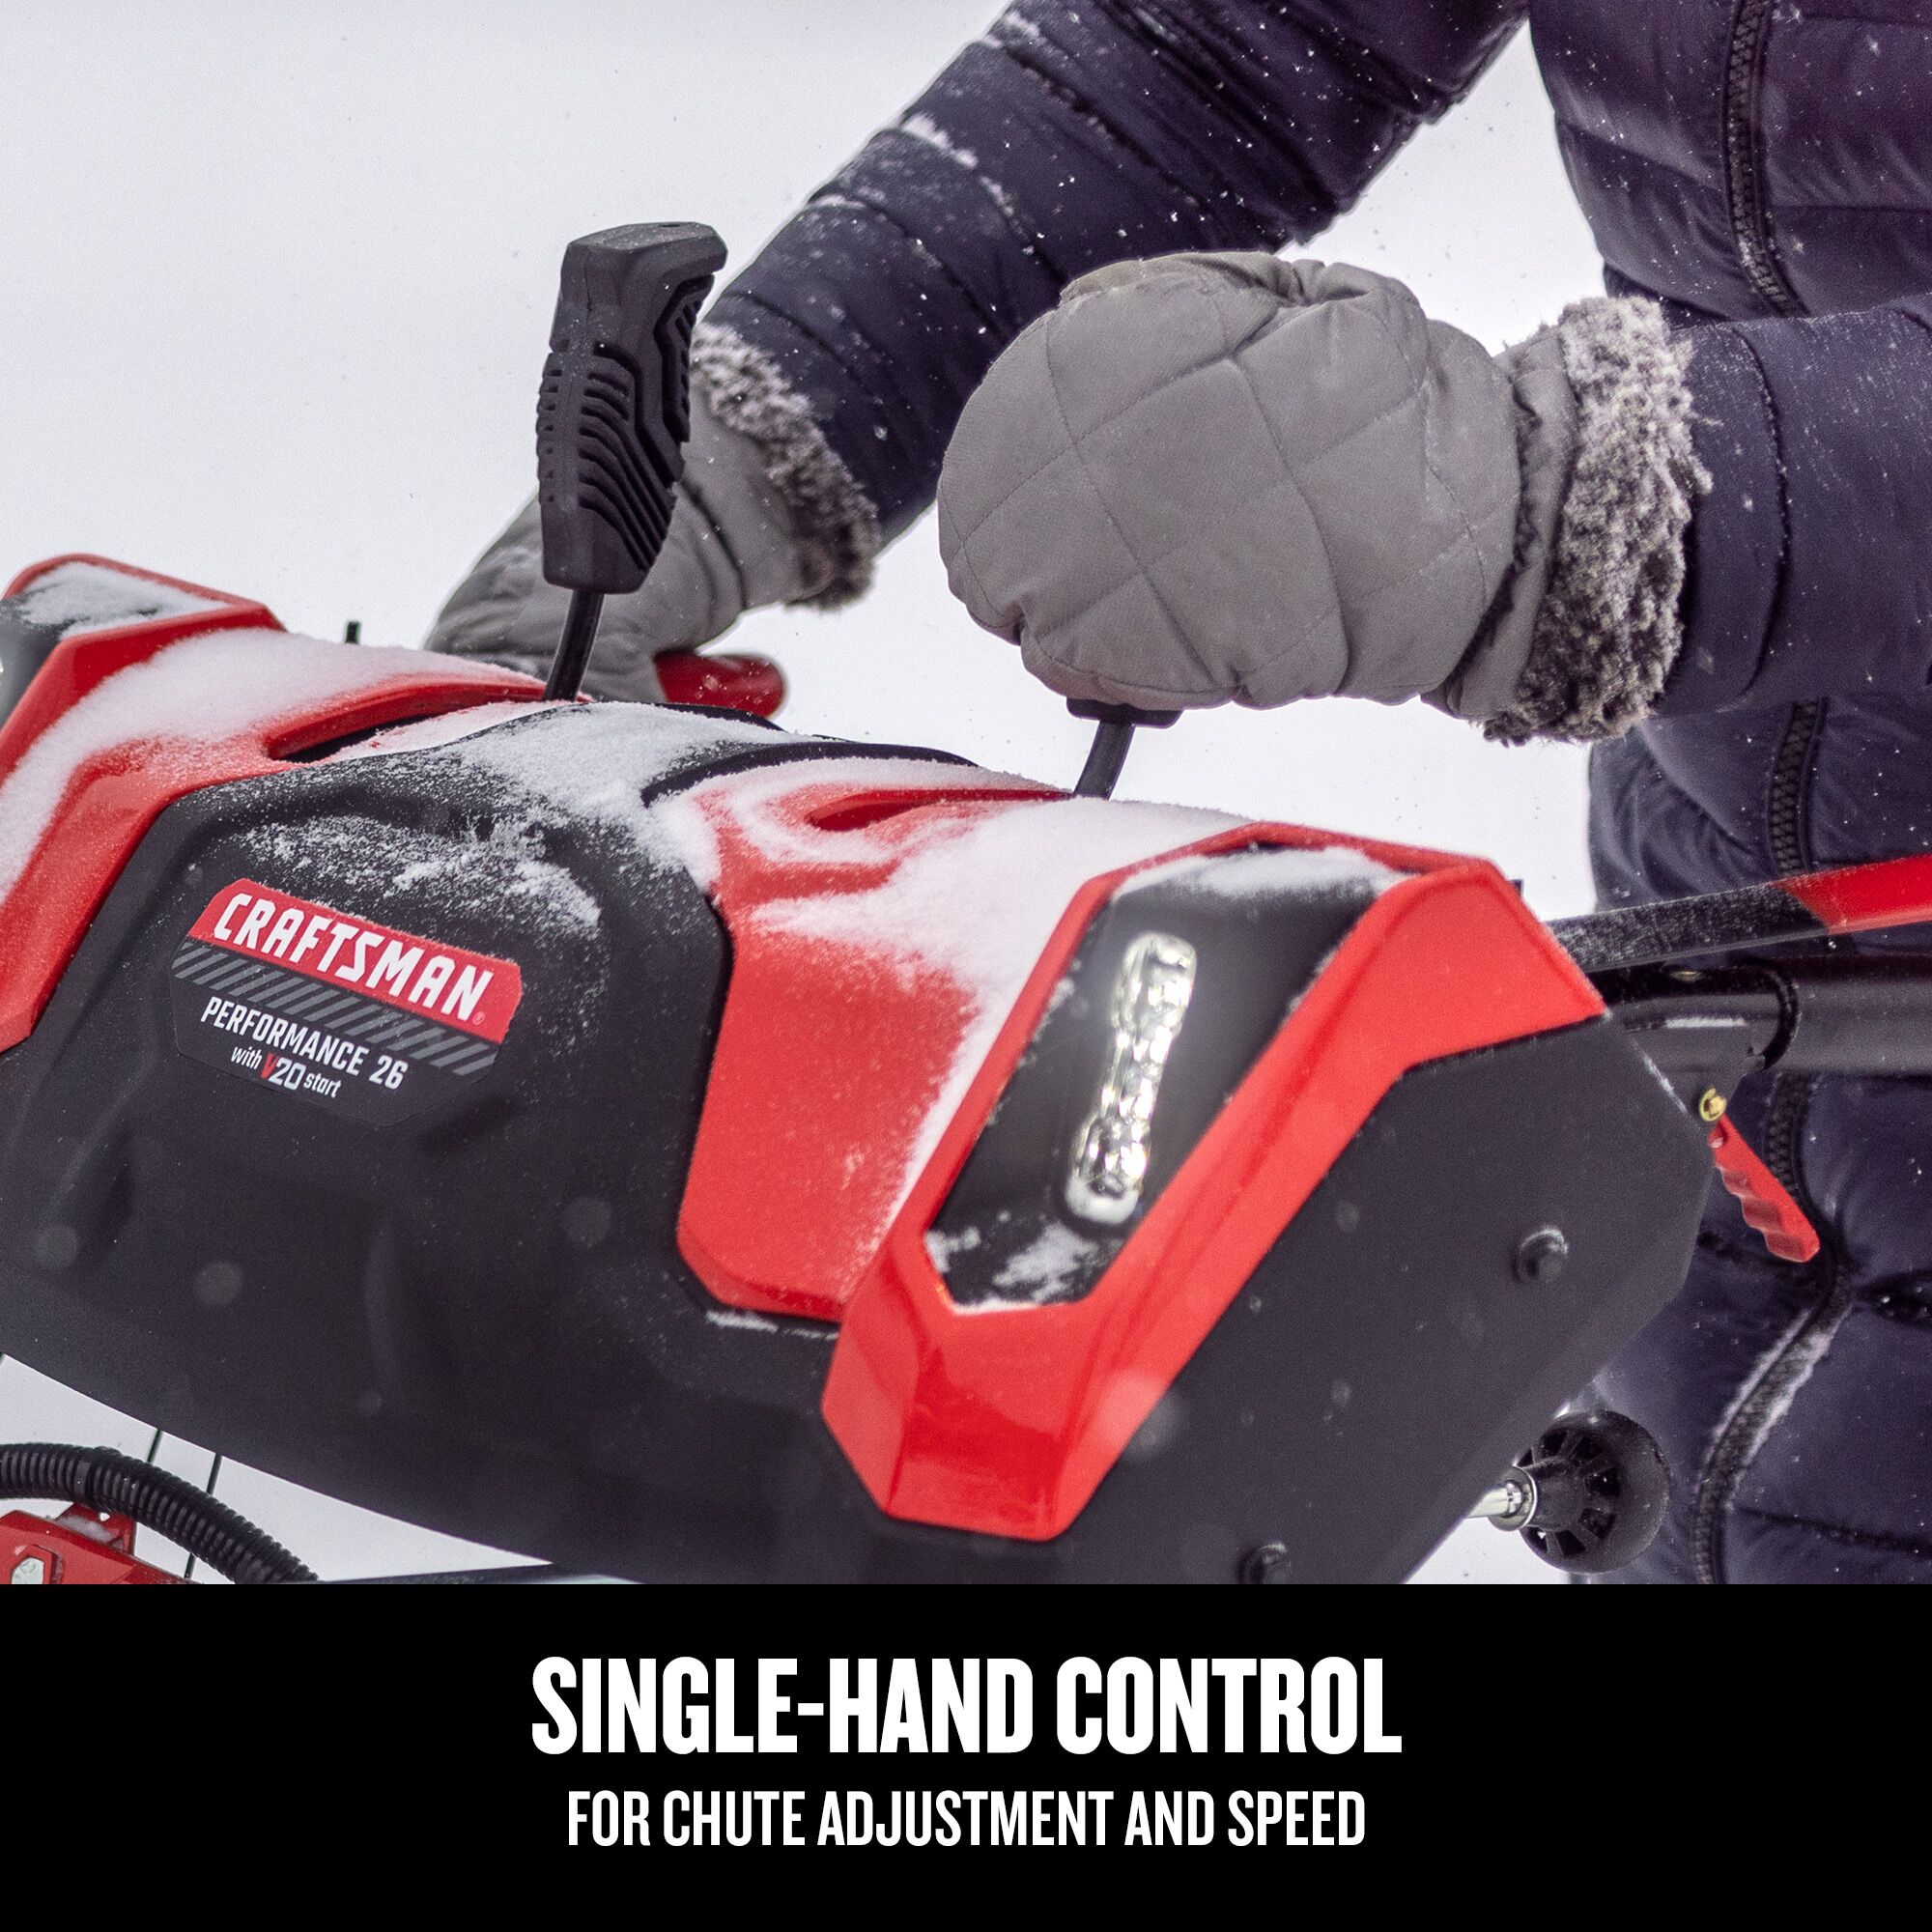 CRAFTSMAN V20* Start 26-in. 243-cc Two Stage Gas Snow Blower focused in on single-hand control